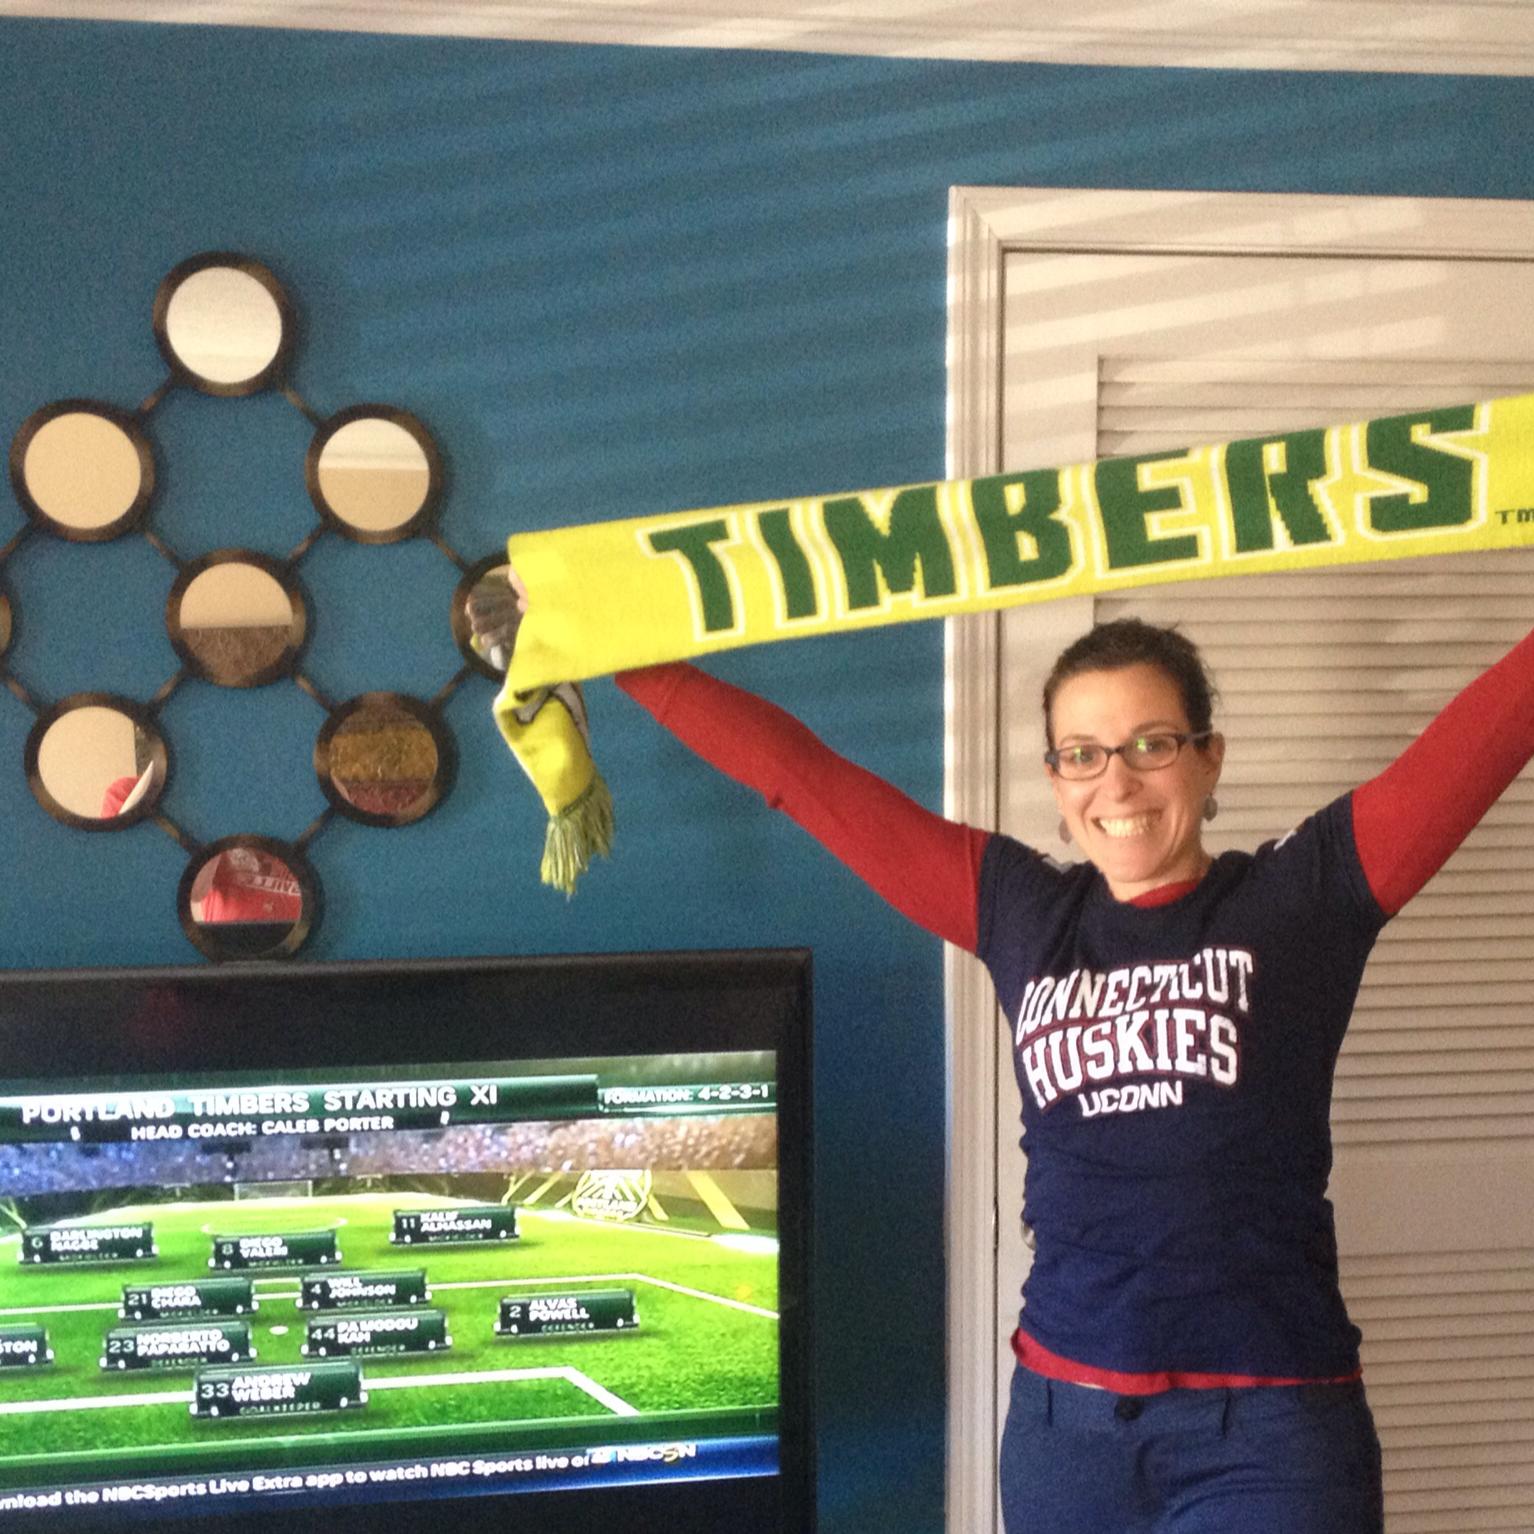 Cheering for Portland Timbers (PTFC) and Huskies Saturday.